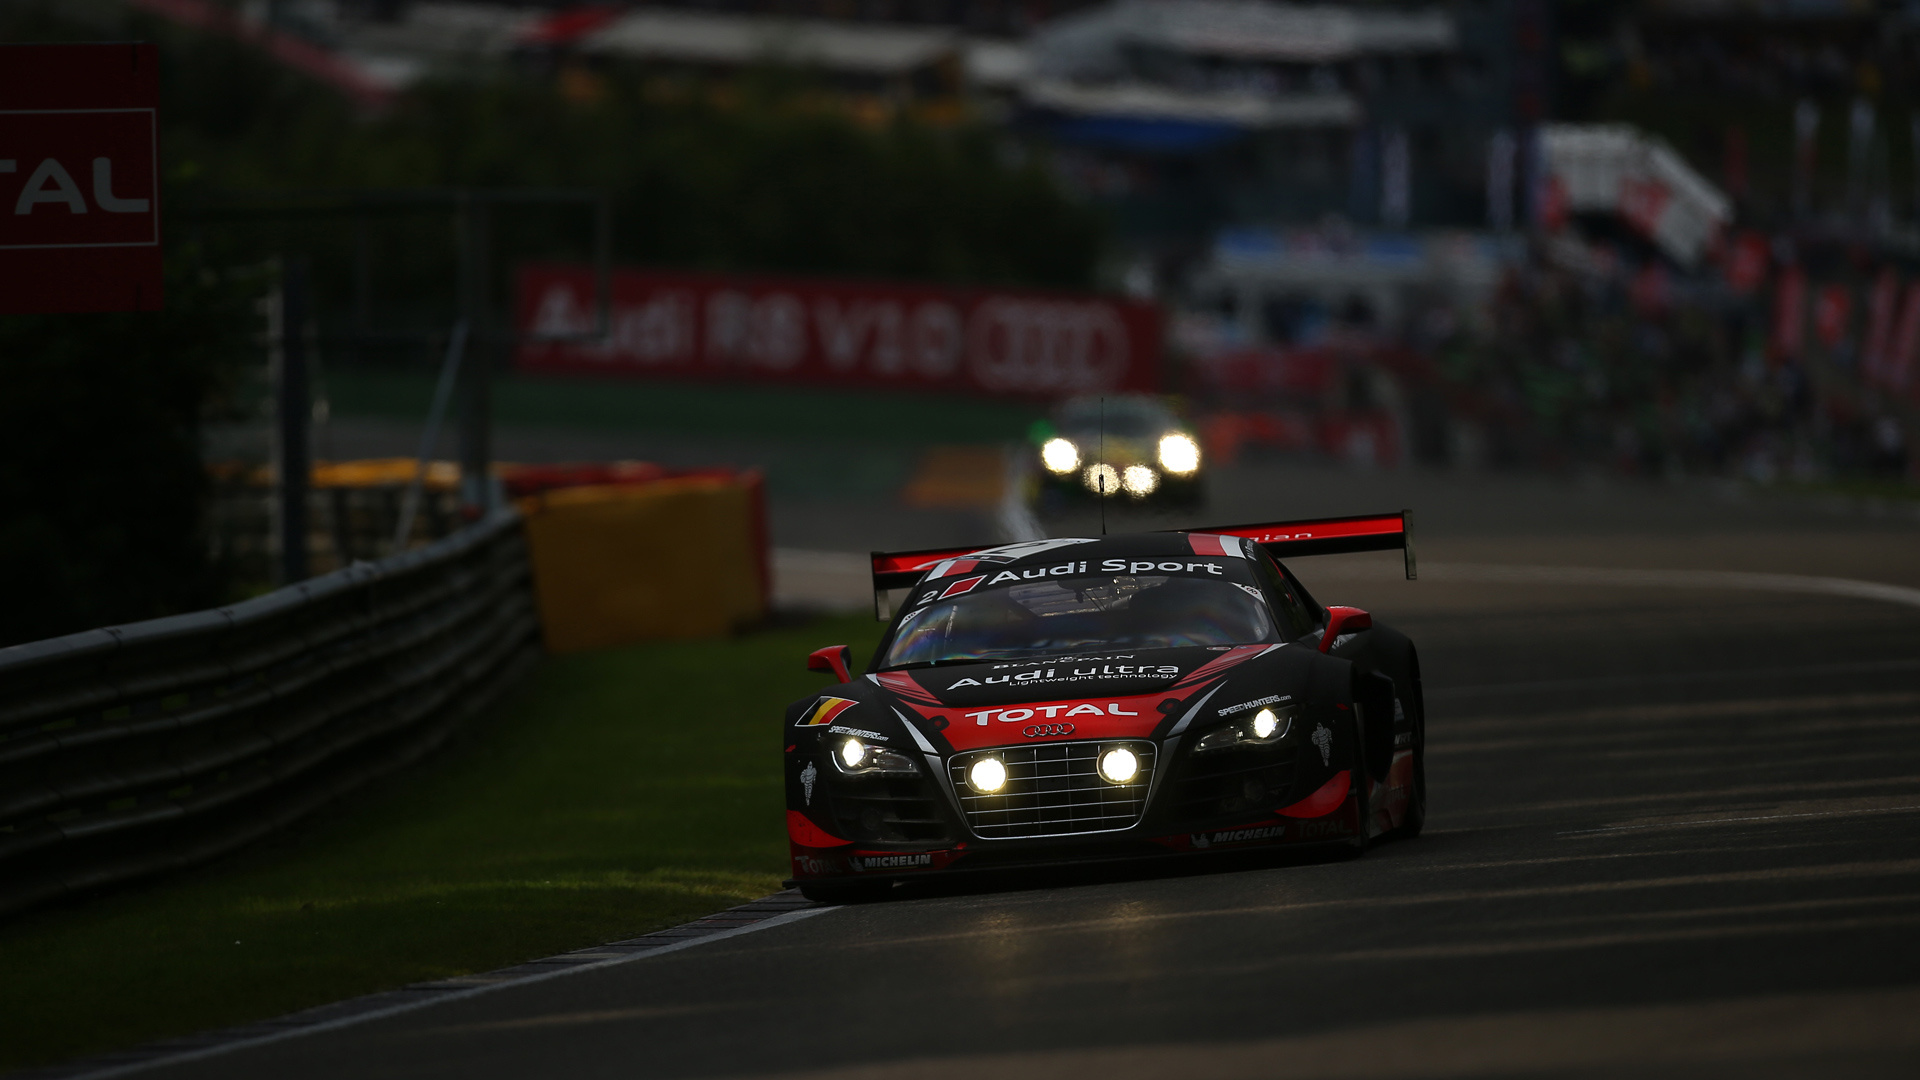 Auto Racing: Nurburgring, Audi R8 LMS, Racetrack, 16th overall victory, 24-hour race. 1920x1080 Full HD Background.